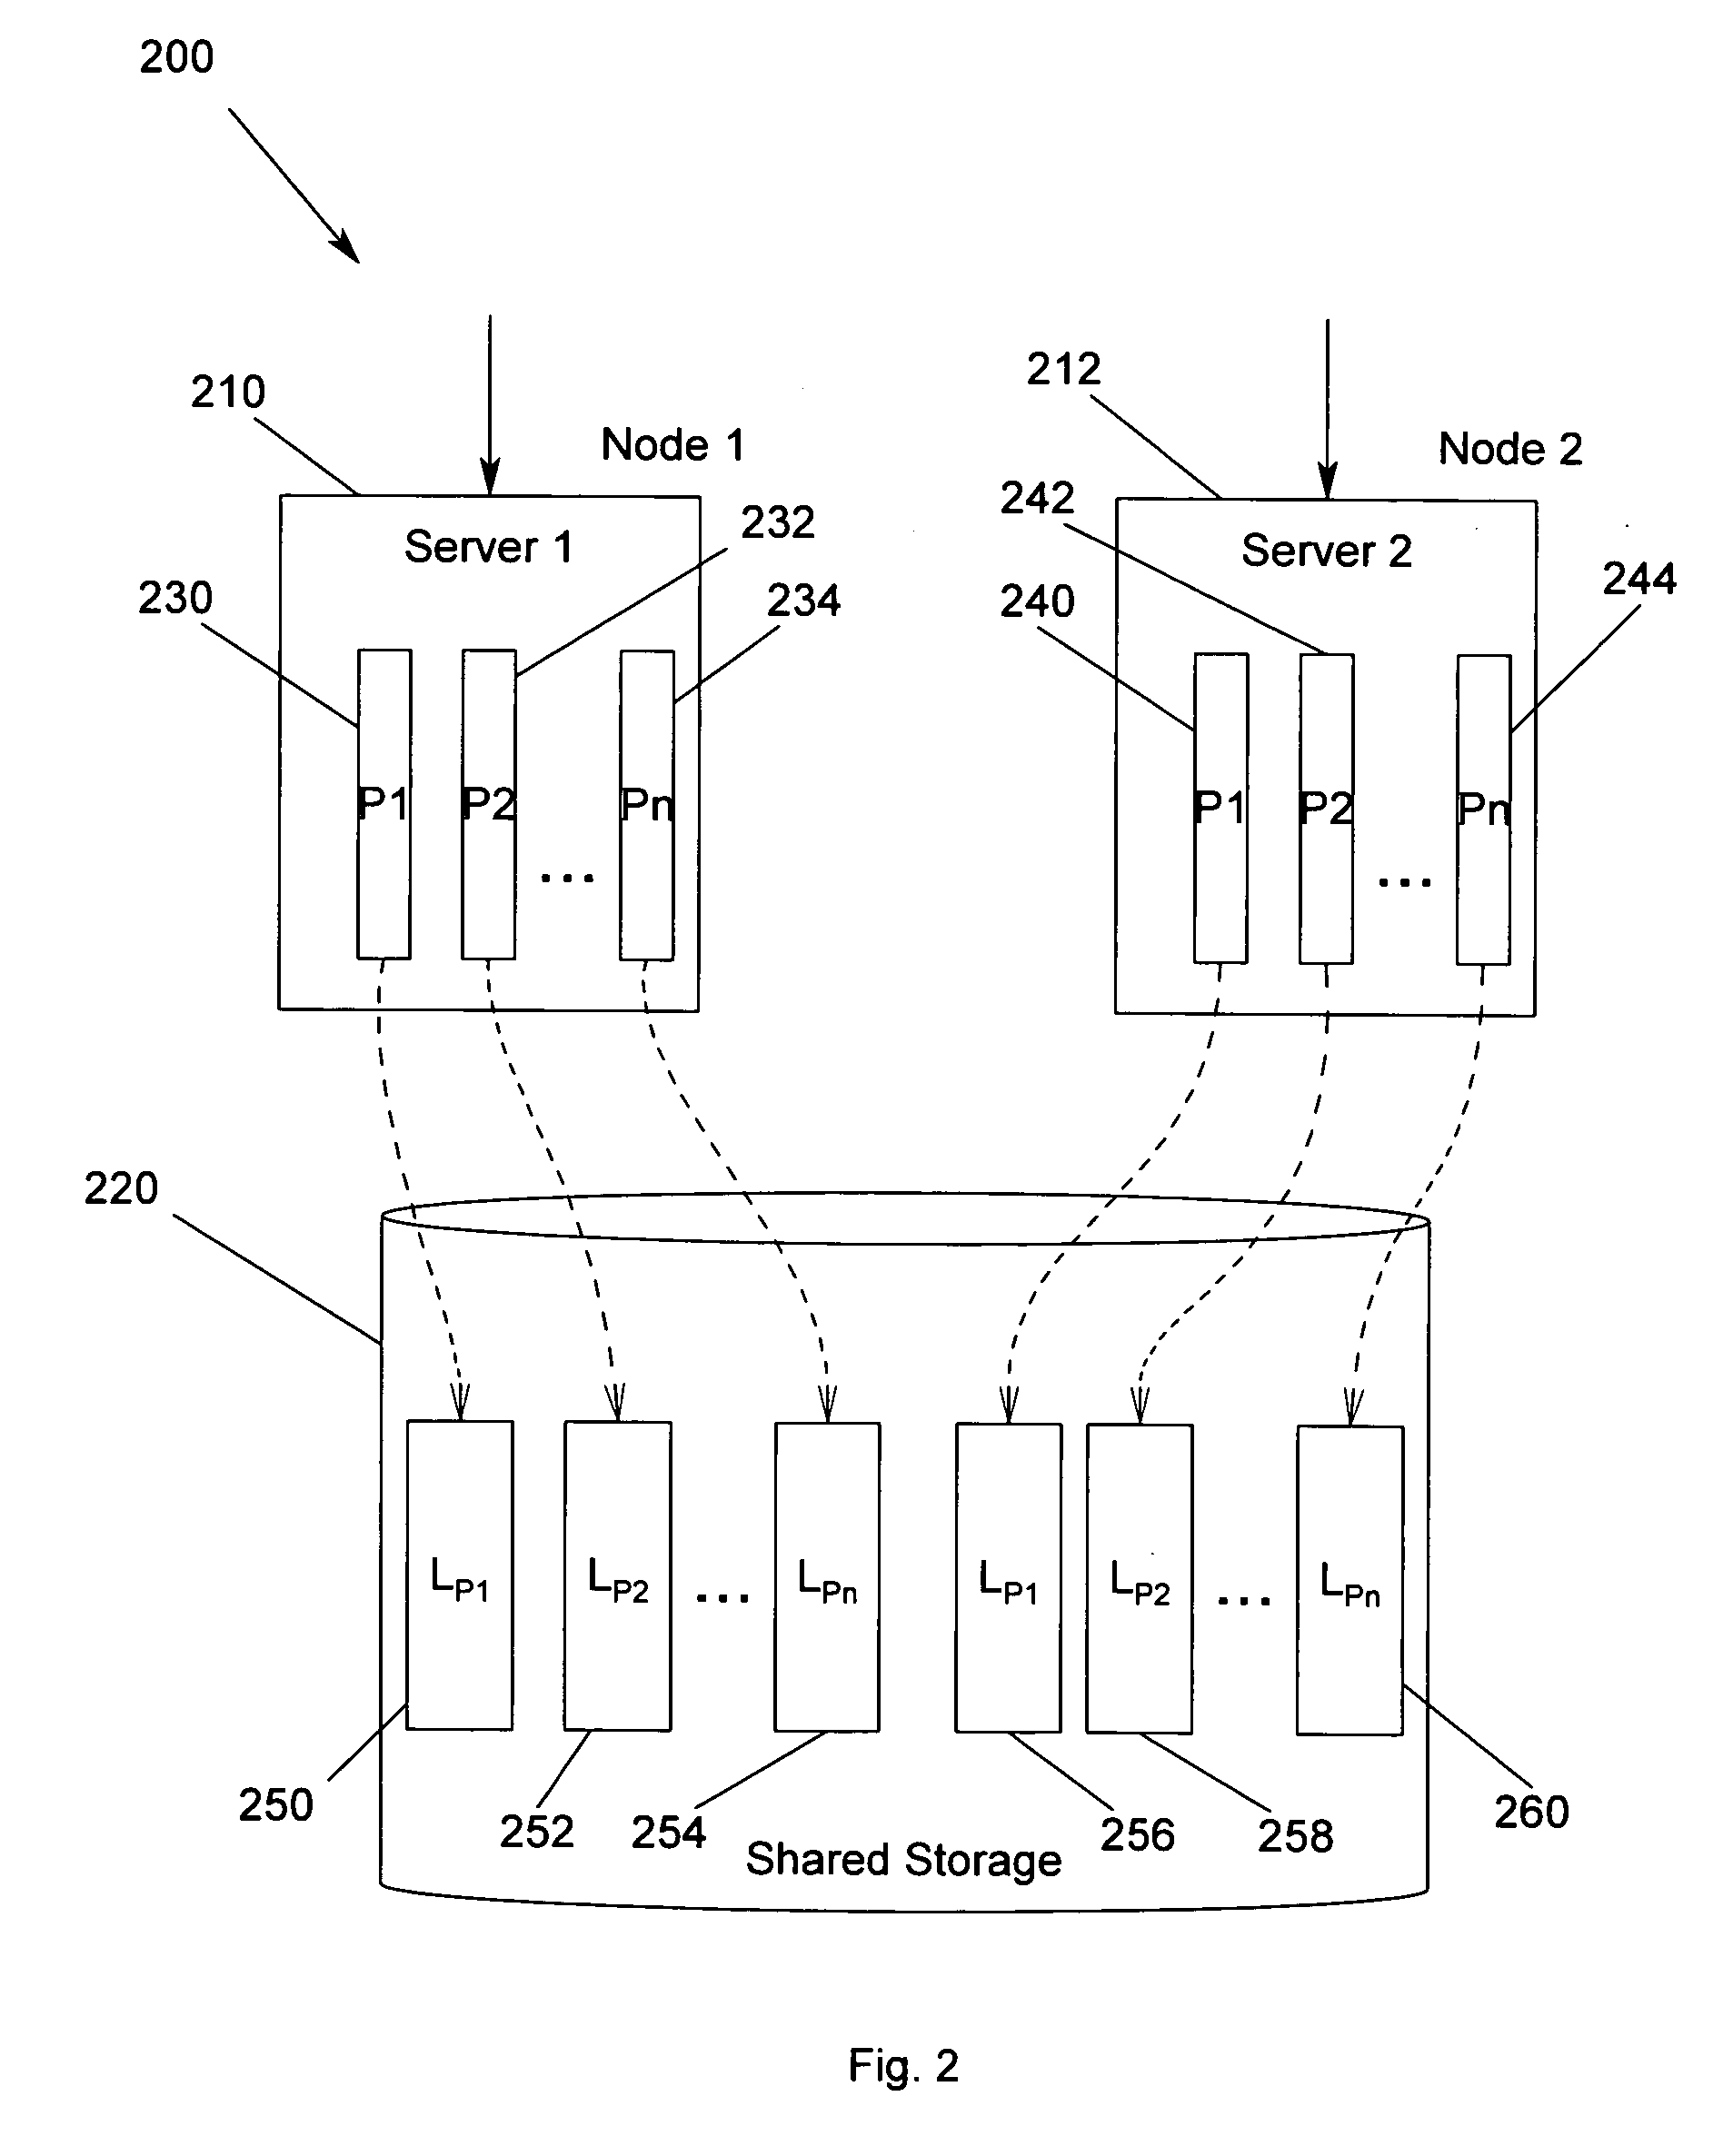 Method, apparatus and program storage device for providing failover for high availability in an N-way shared-nothing cluster system